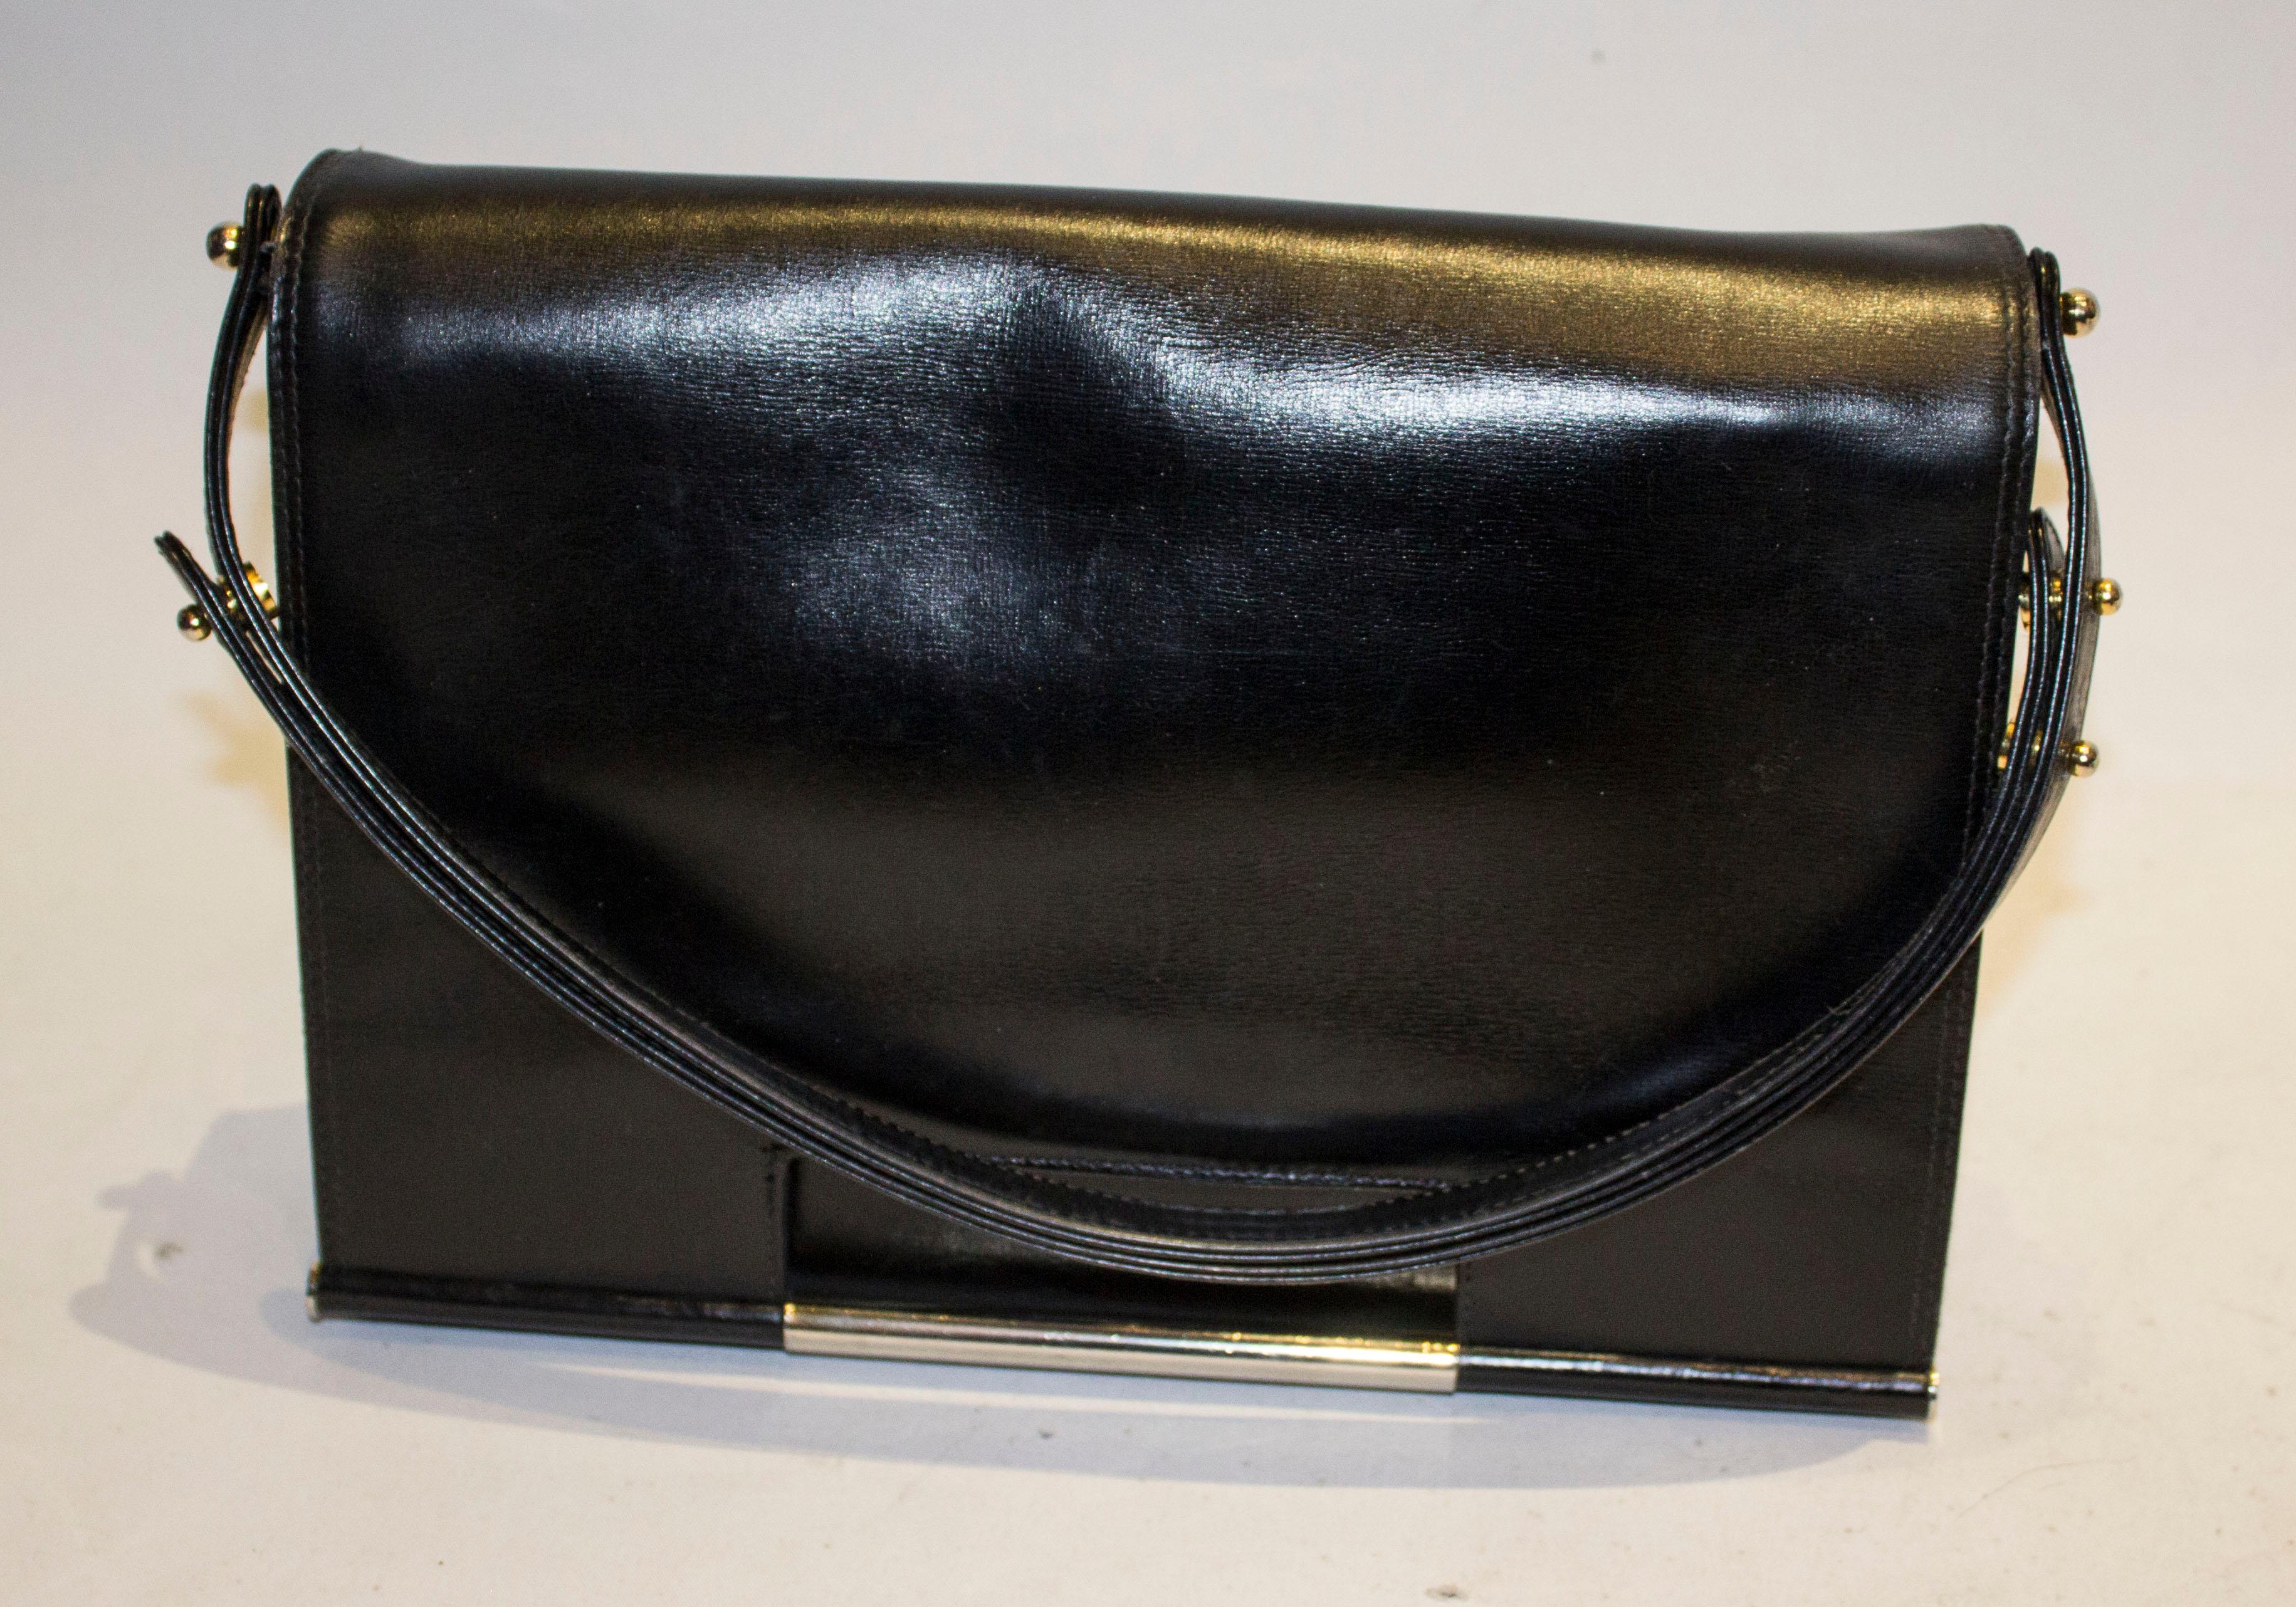 A chic vintage black leather bag by Launer. The bag has a flap over front with popper fastening and pouch pocket at the back. Internally there is a zip pocket in the lid ( like Chanel) and two compartments , one with a small pouch pocket.  The